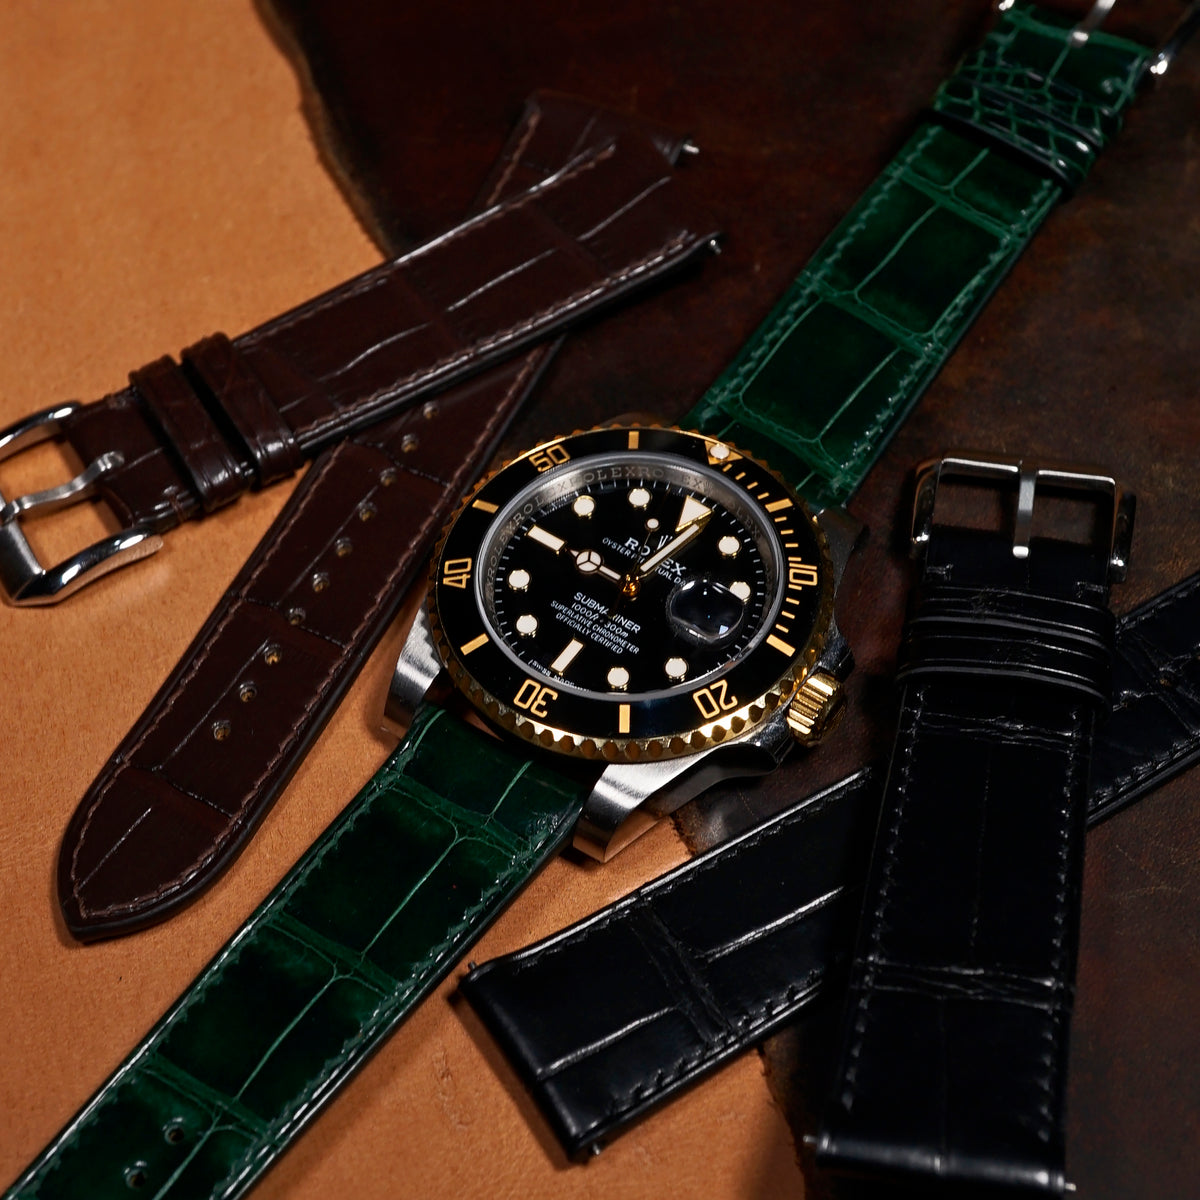 Alligator Leather Watch Strap in Green (Glossy) - Nomad Watch Works SG